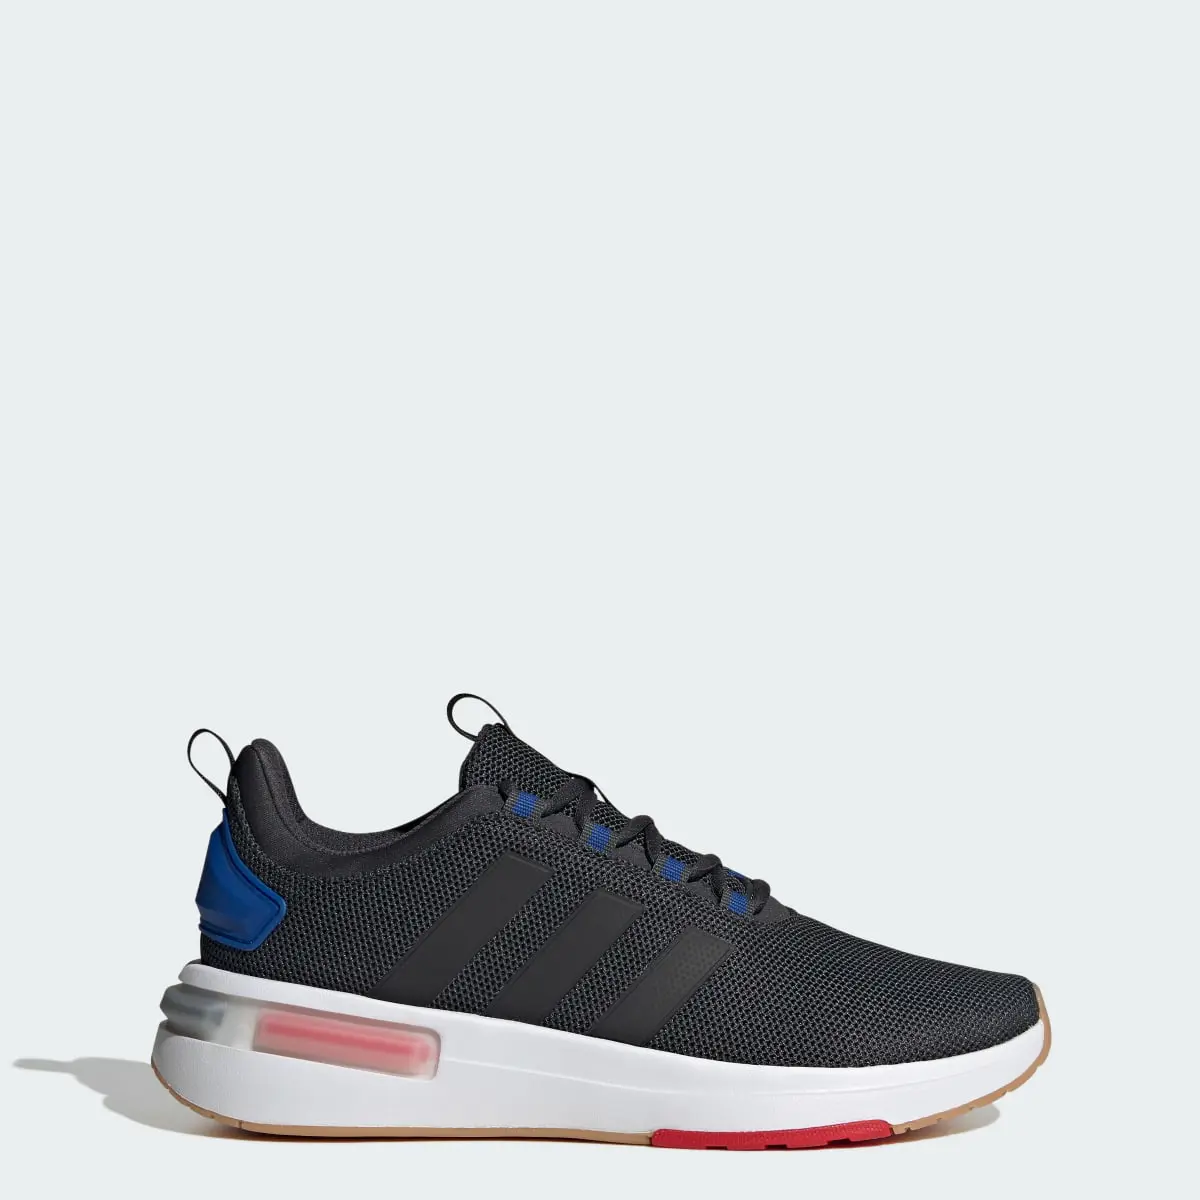 Adidas Racer TR23 Shoes. 1